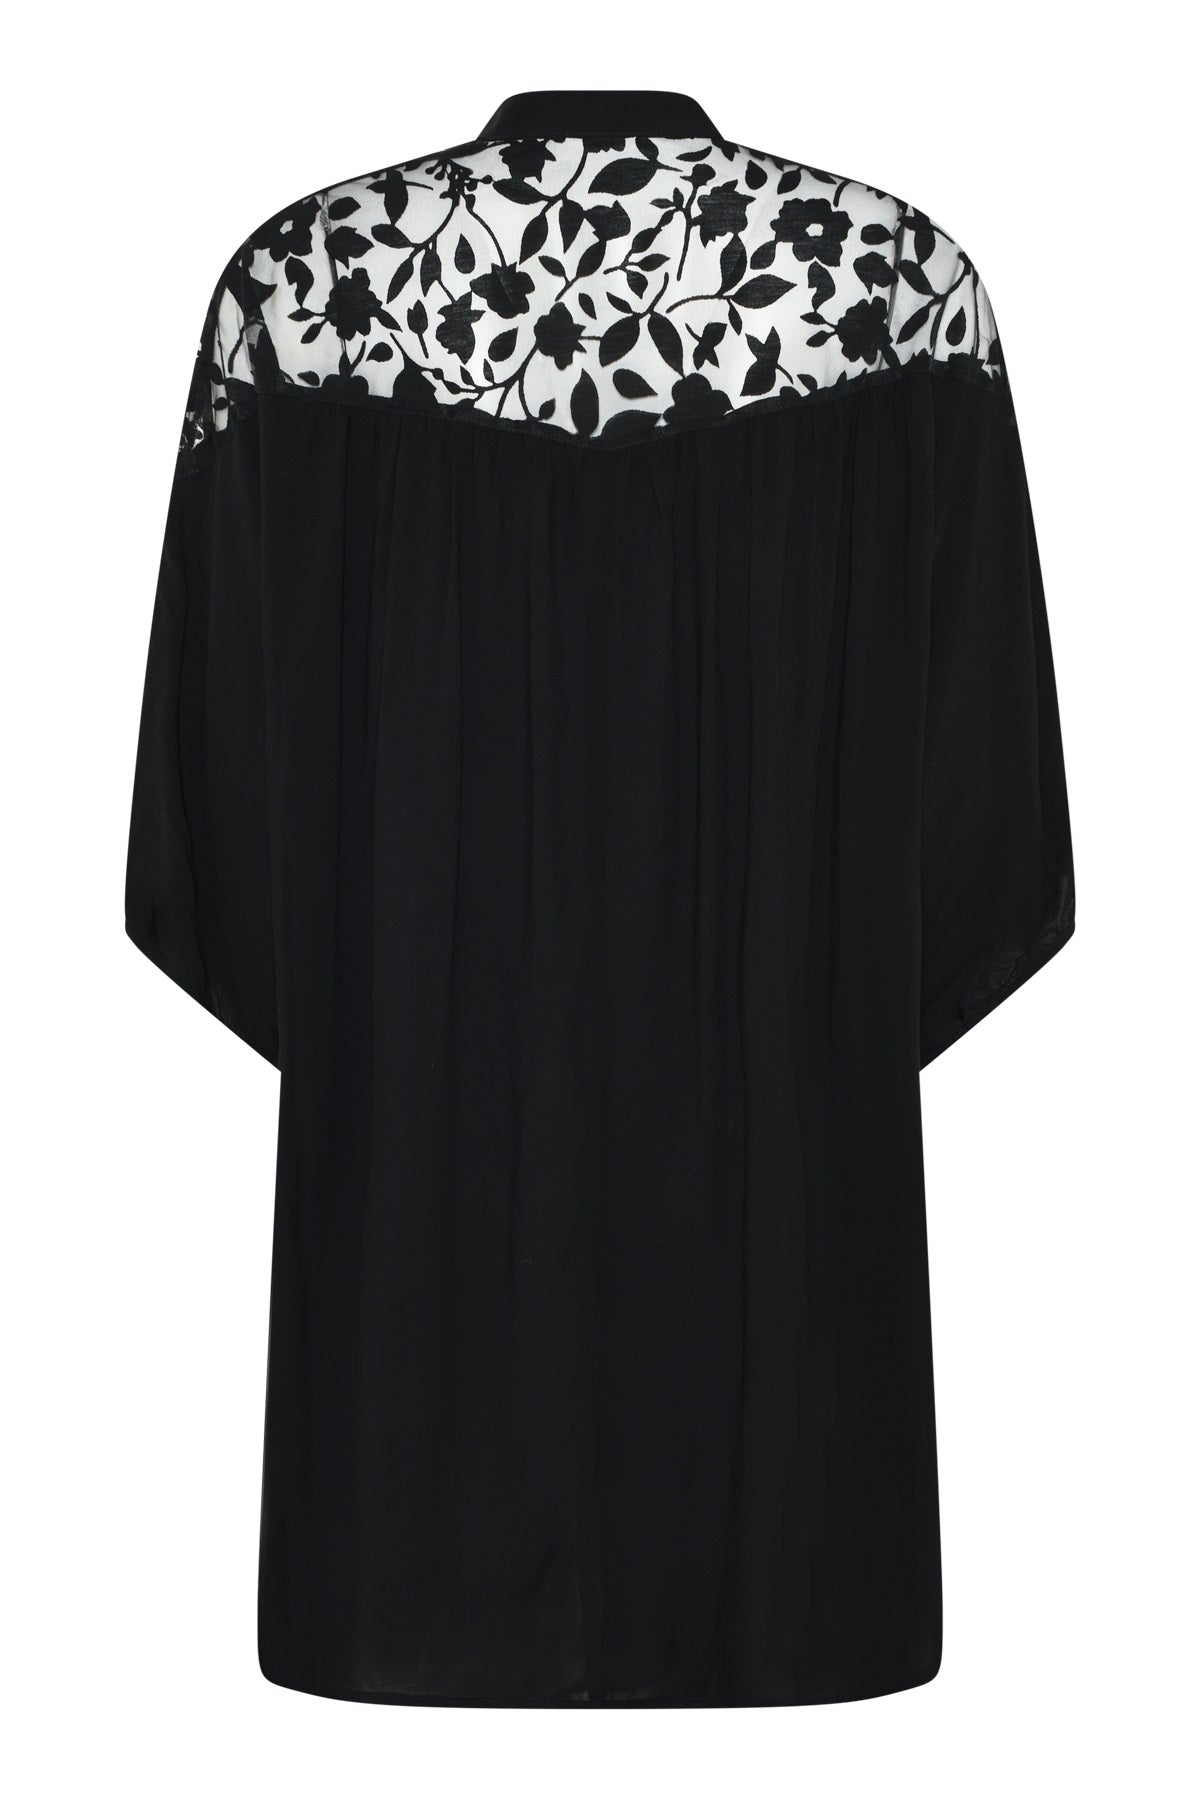 Que tunic with short sleeves and floral pieces